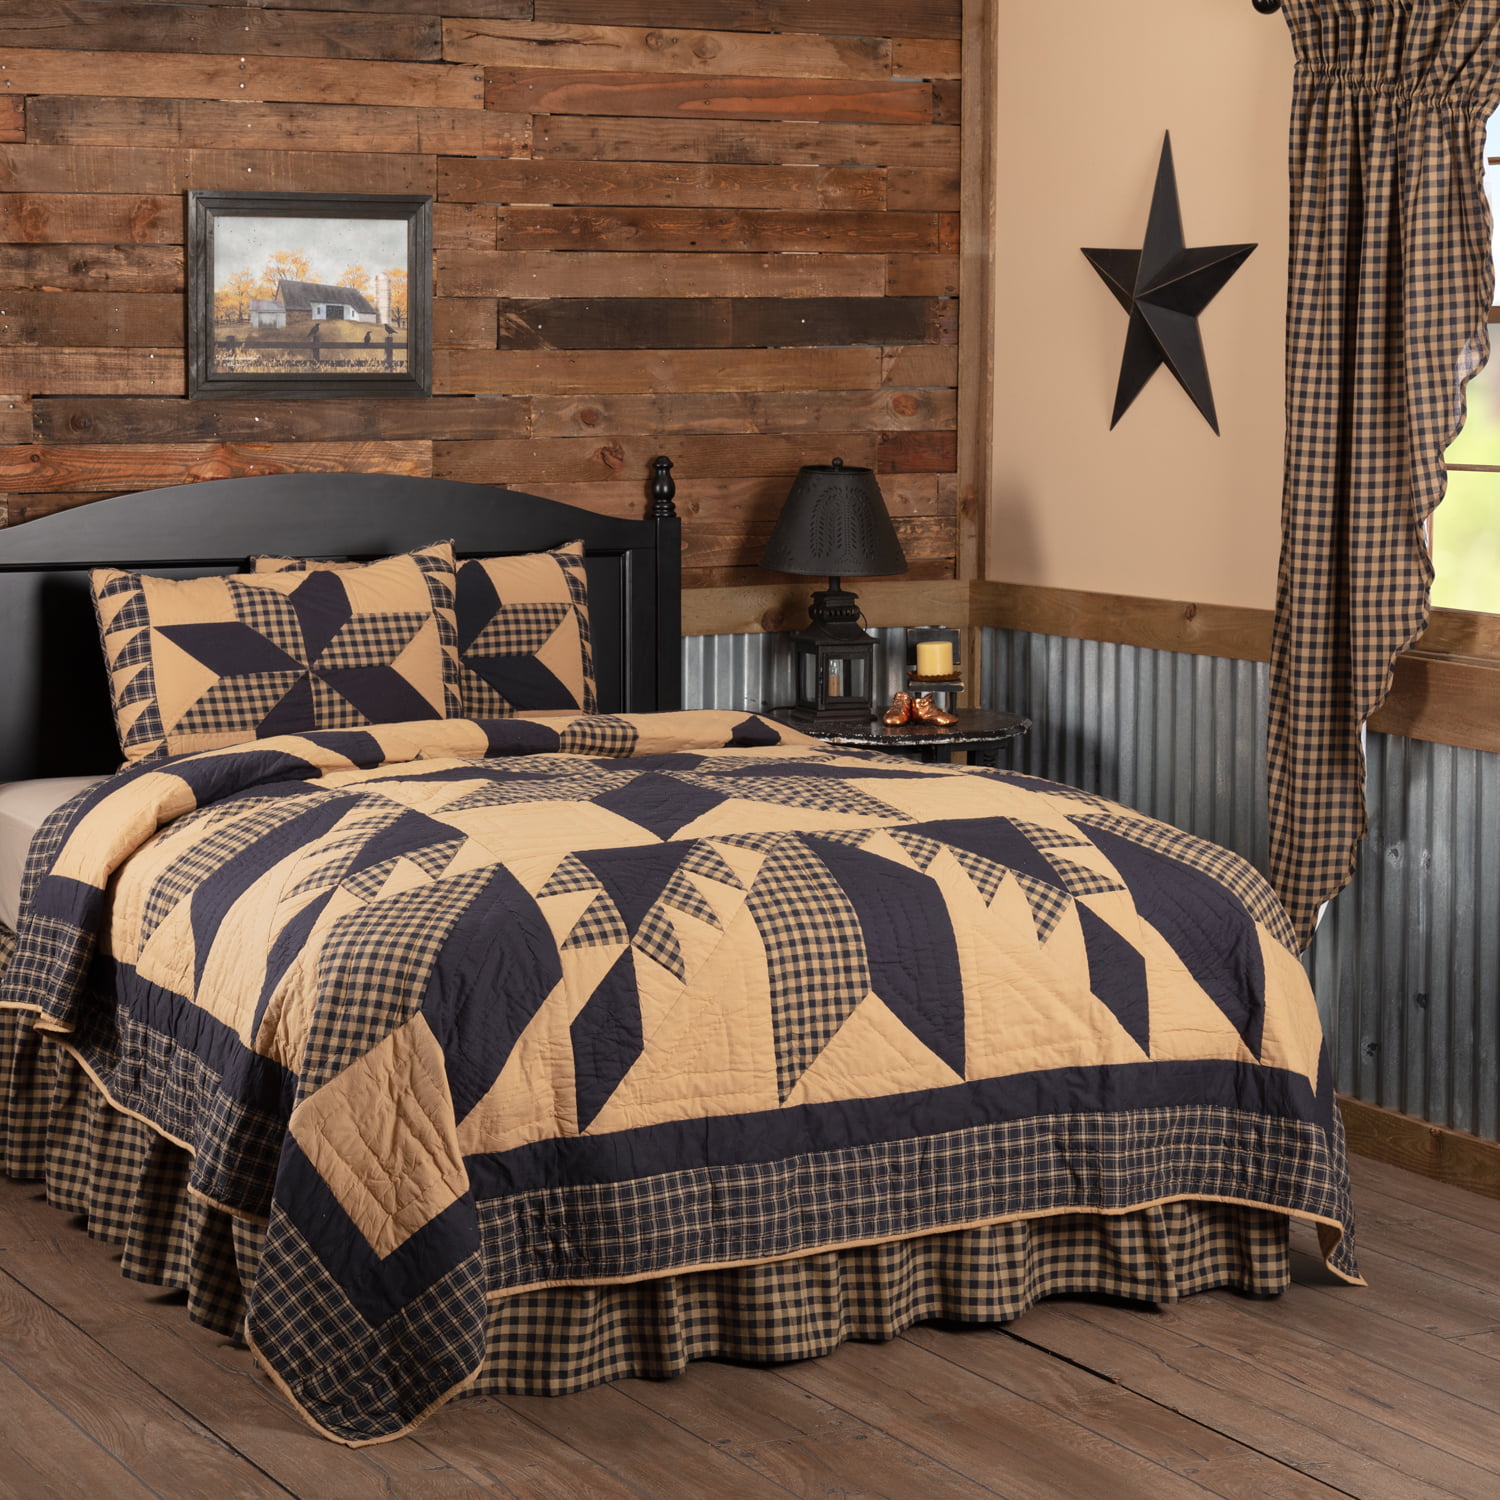 Tan 45612 VHC Brands Primitive Bedding National Museum Kindred Stars and Bars Quilt Twin